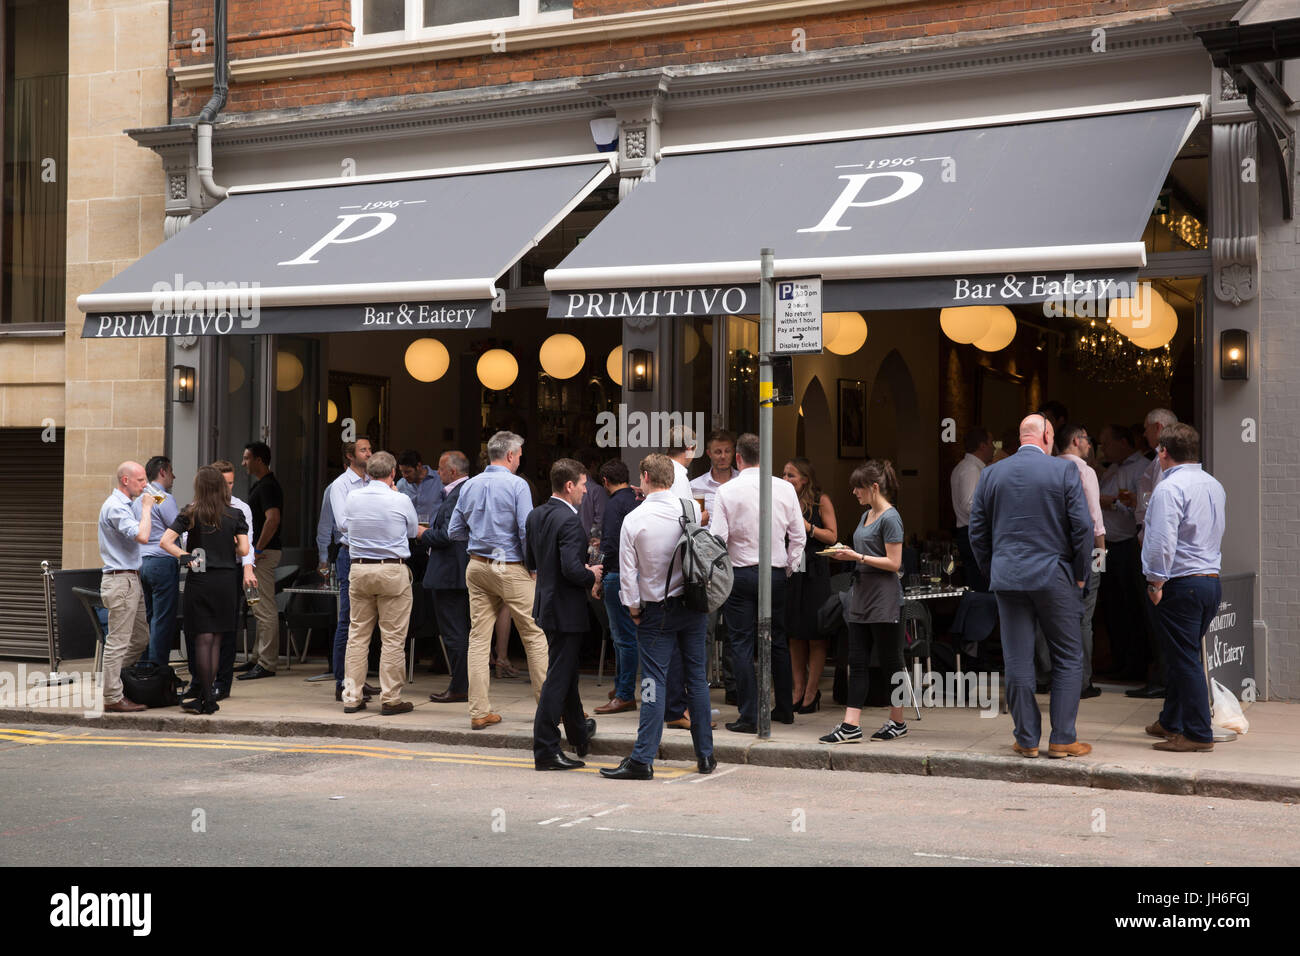 People standing drinking and eating on a pavement outside a Primitivo restaurant in Birmingham City Centre, UK Stock Photo